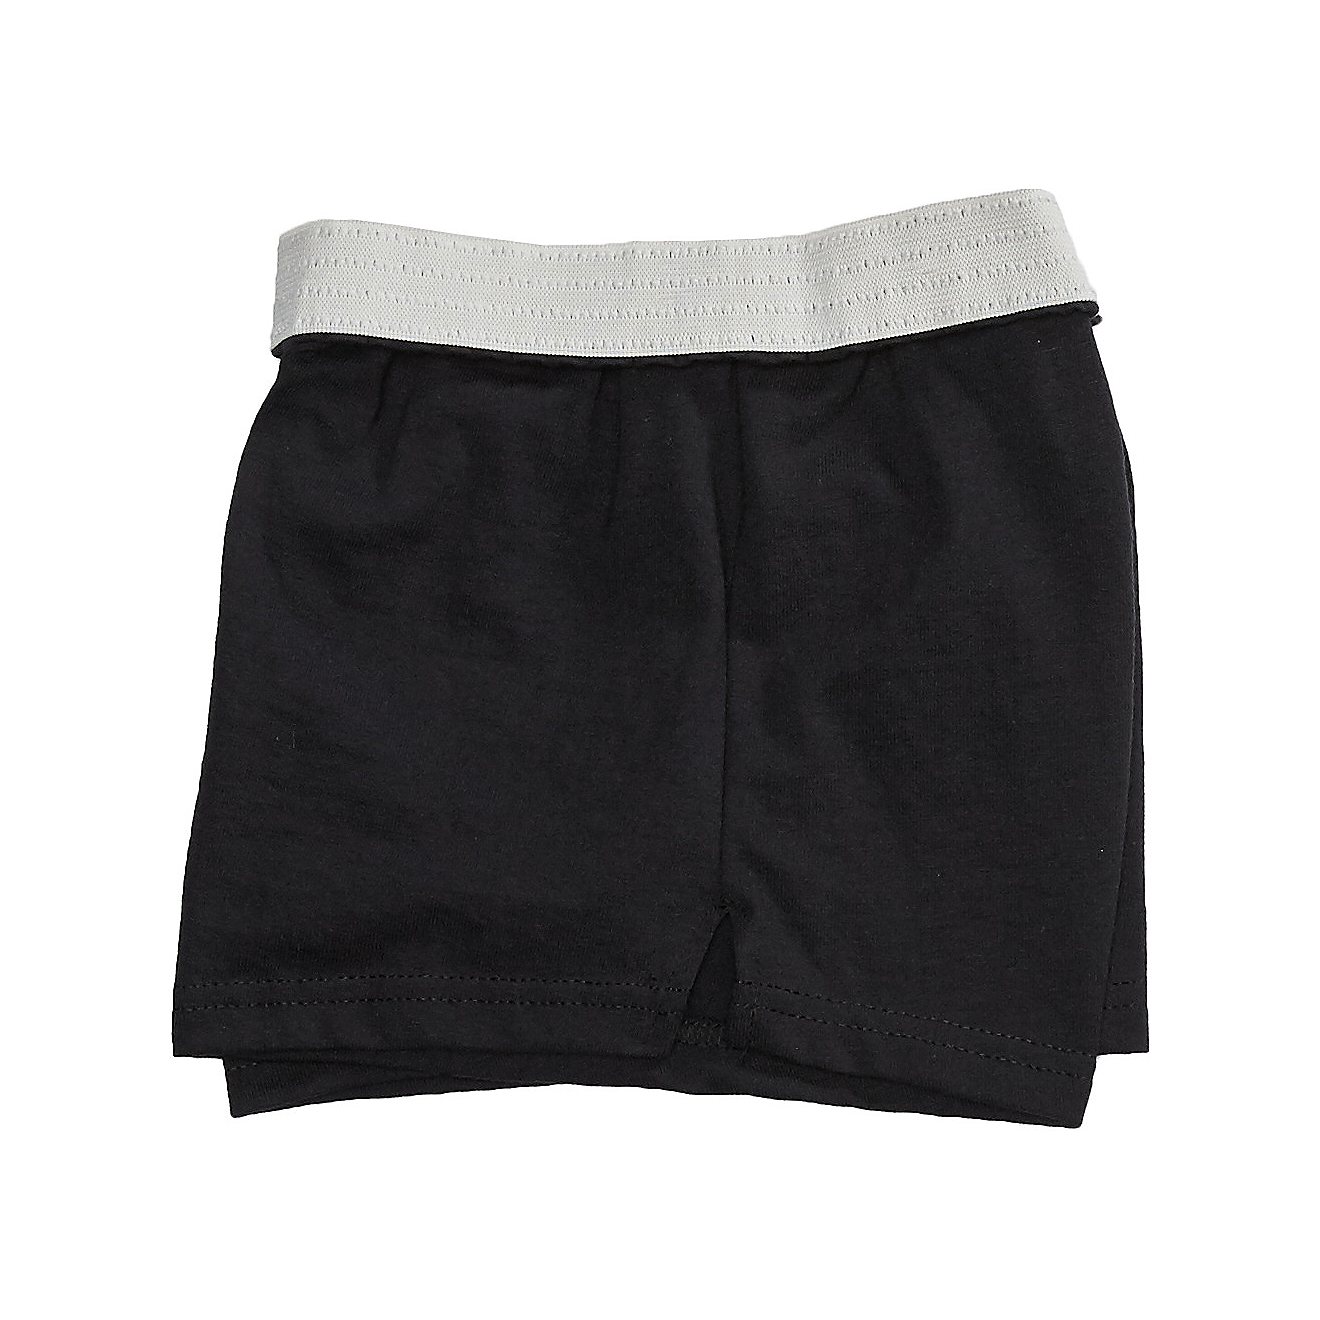 Soffe Girls' Core Essentials Authentic Short                                                                                     - view number 4